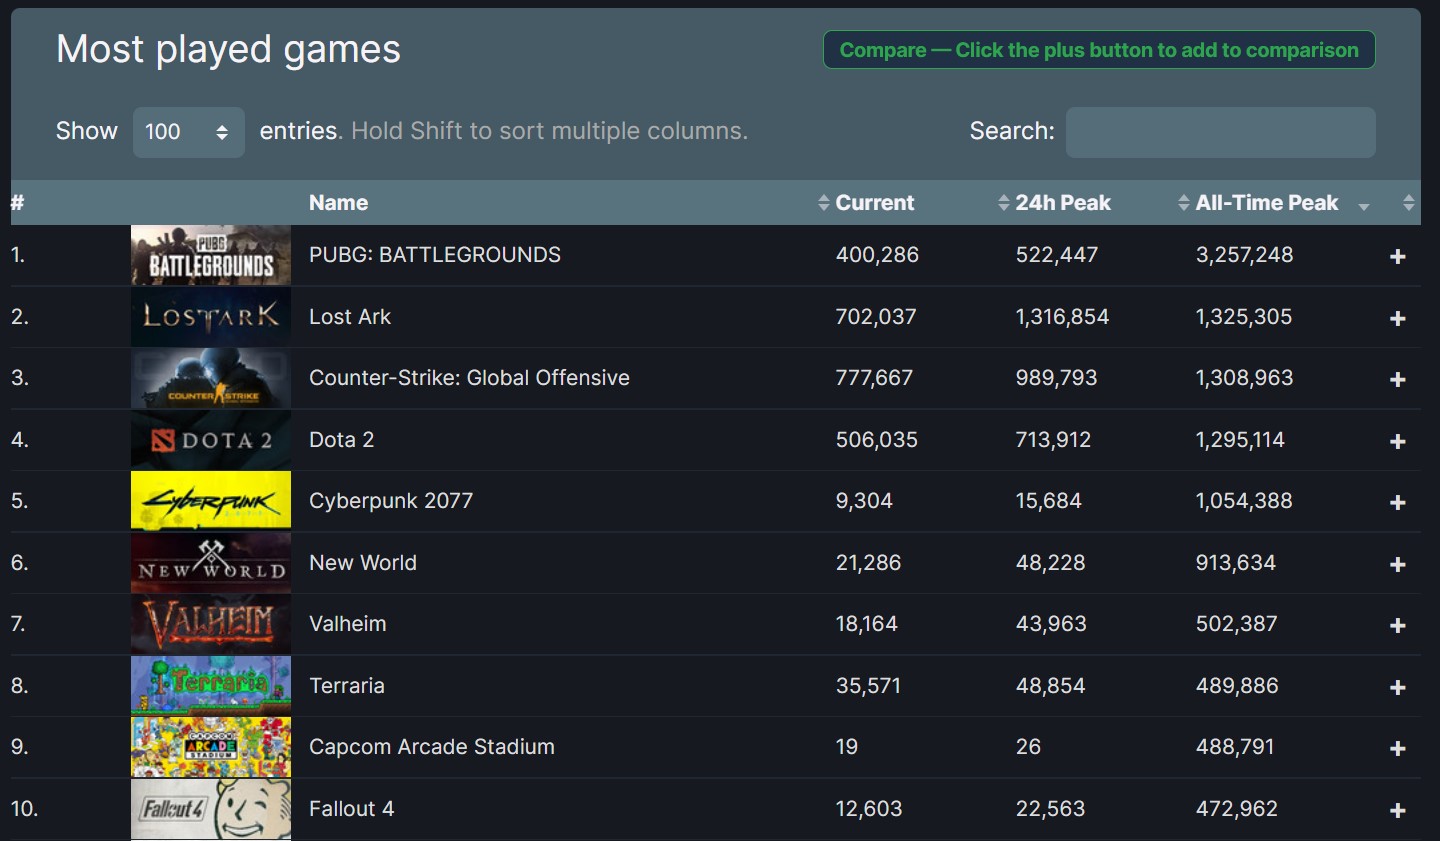 After only 24 hours, Lost Ark becomes the second most played in Steam history